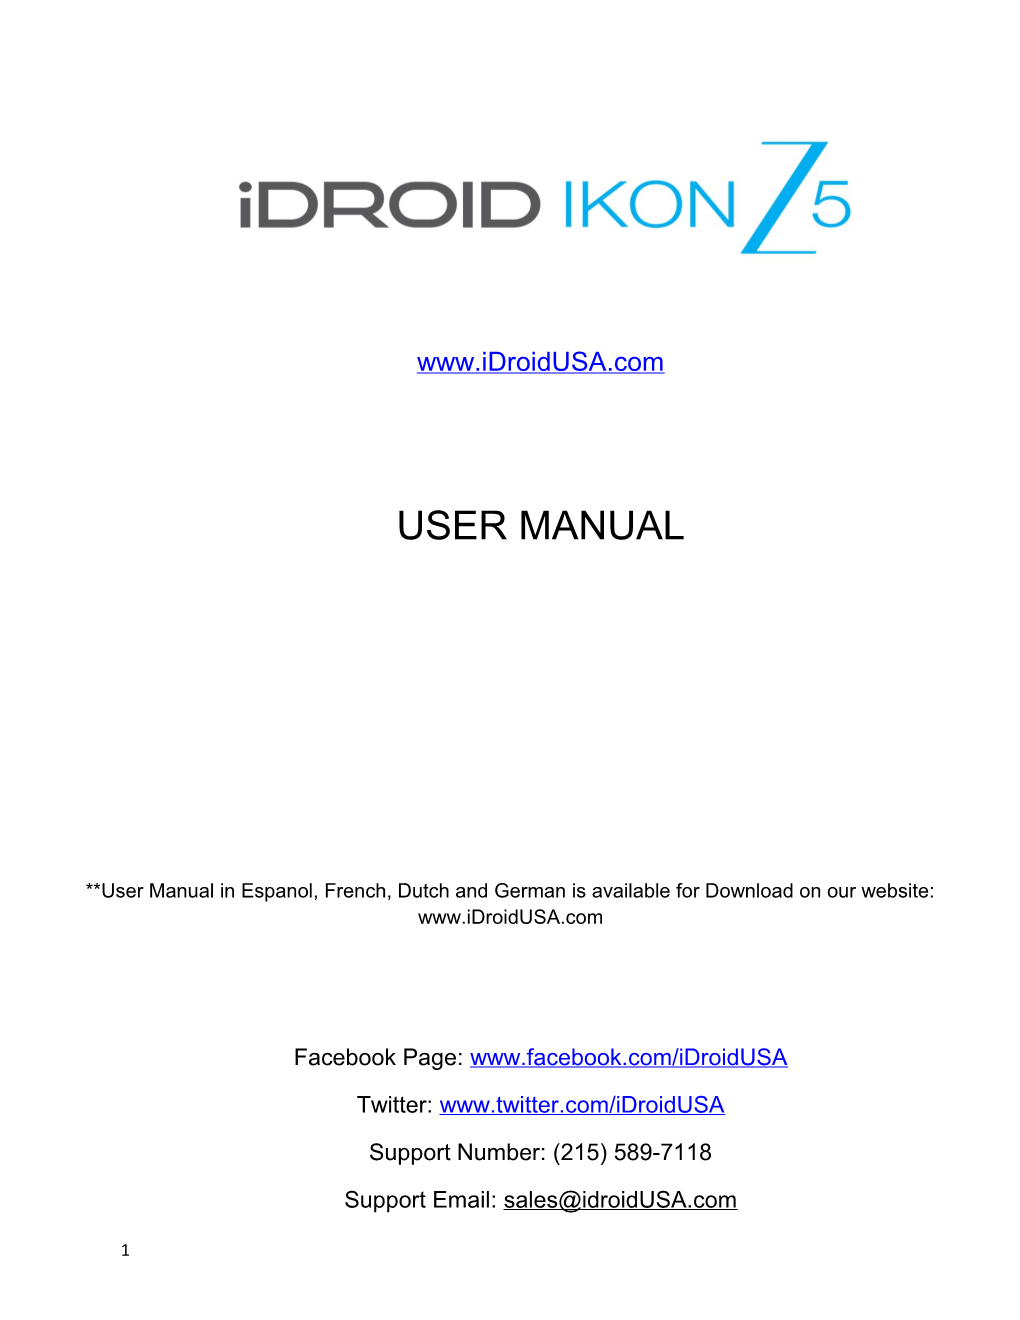 User Manual in Espanol, French, Dutch and German Is Available for Download on Our Website